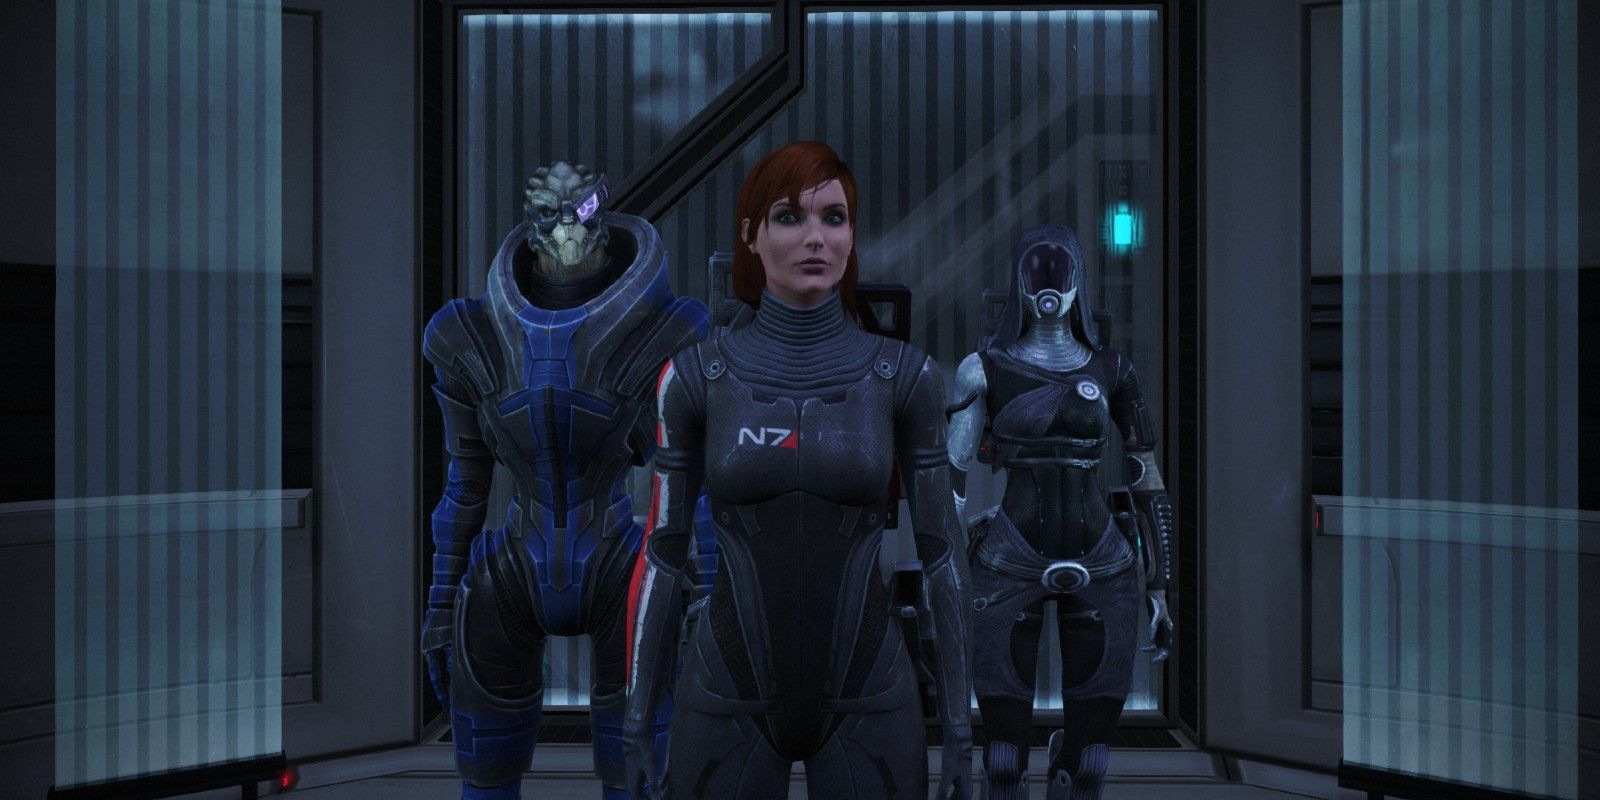 Garrus, Shepard, and Tali in an elevator on the Citadel in Mass Effect Legendary Edition